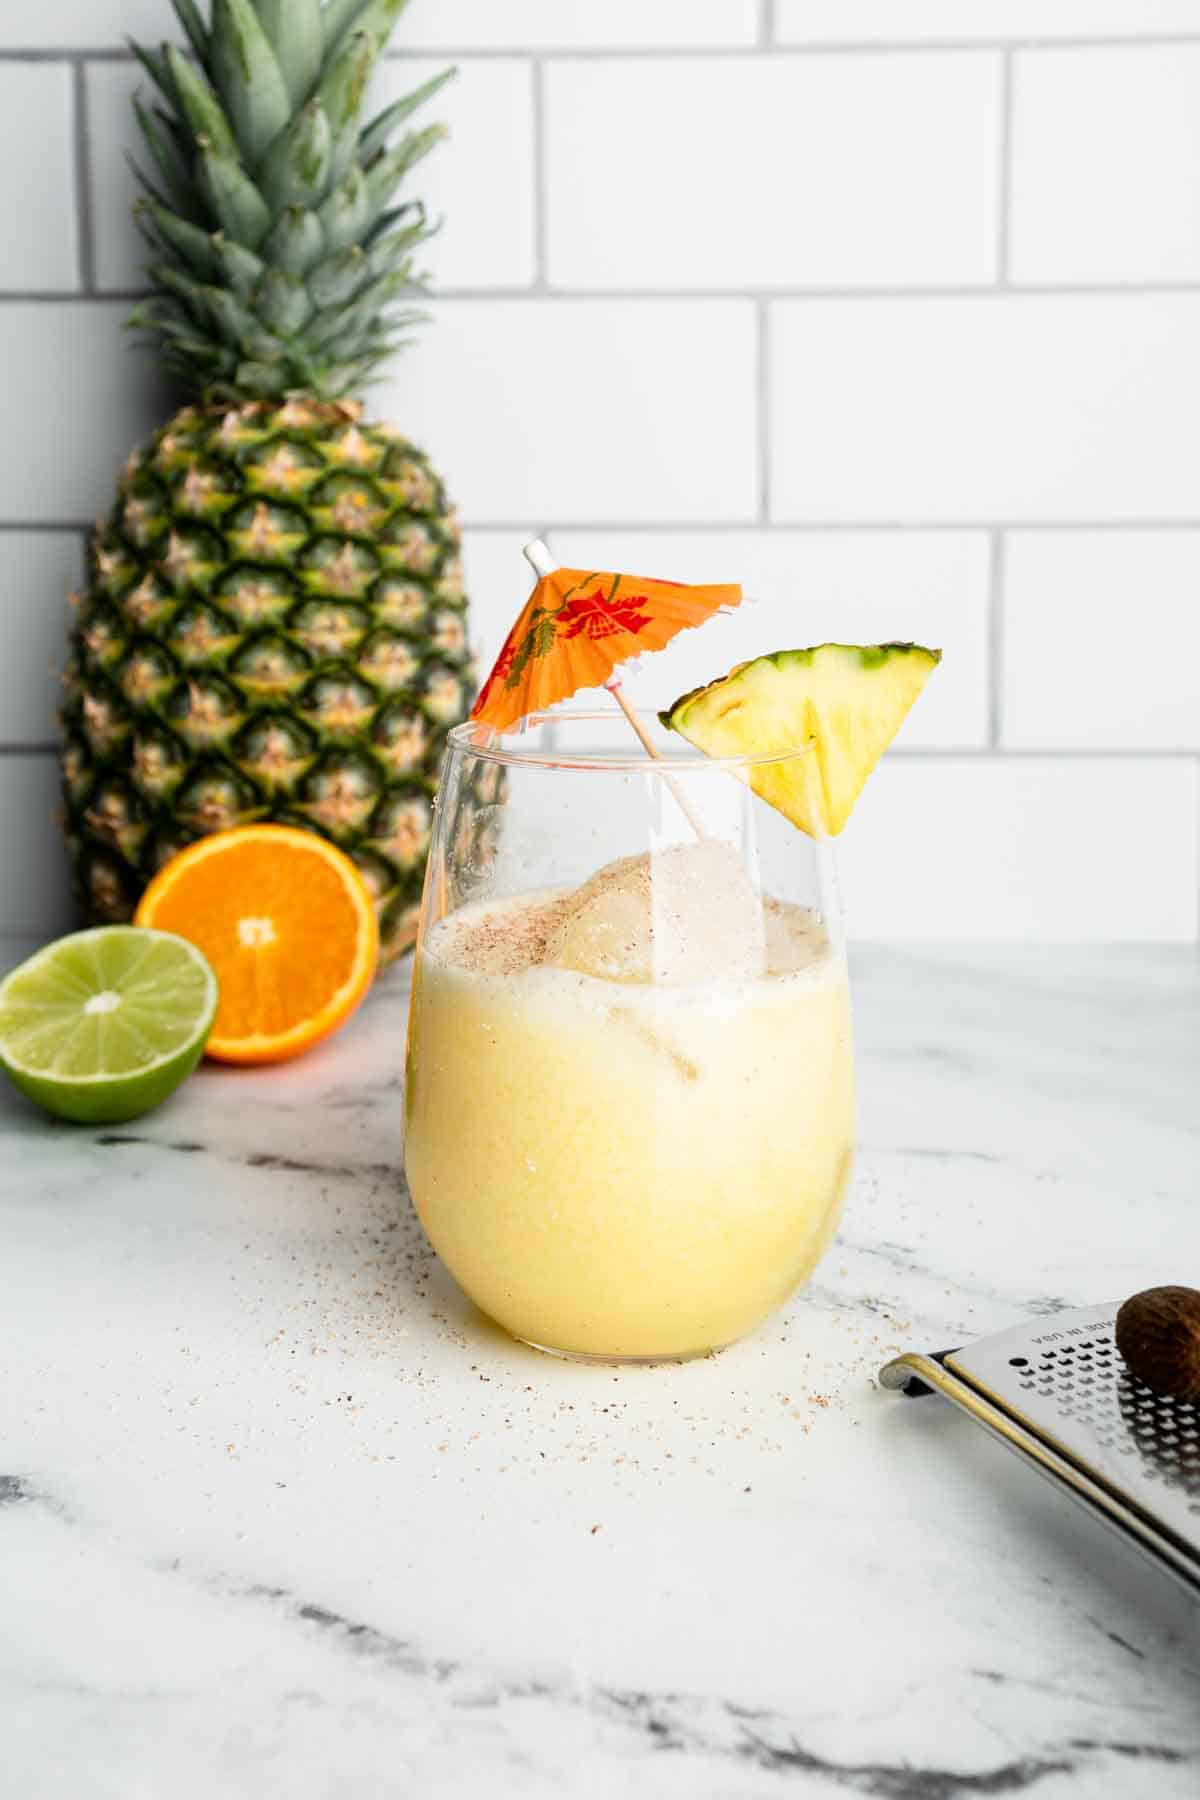 A coconut and pineapple mocktail garnished with fresh pineapple and a cocktail umbrella.